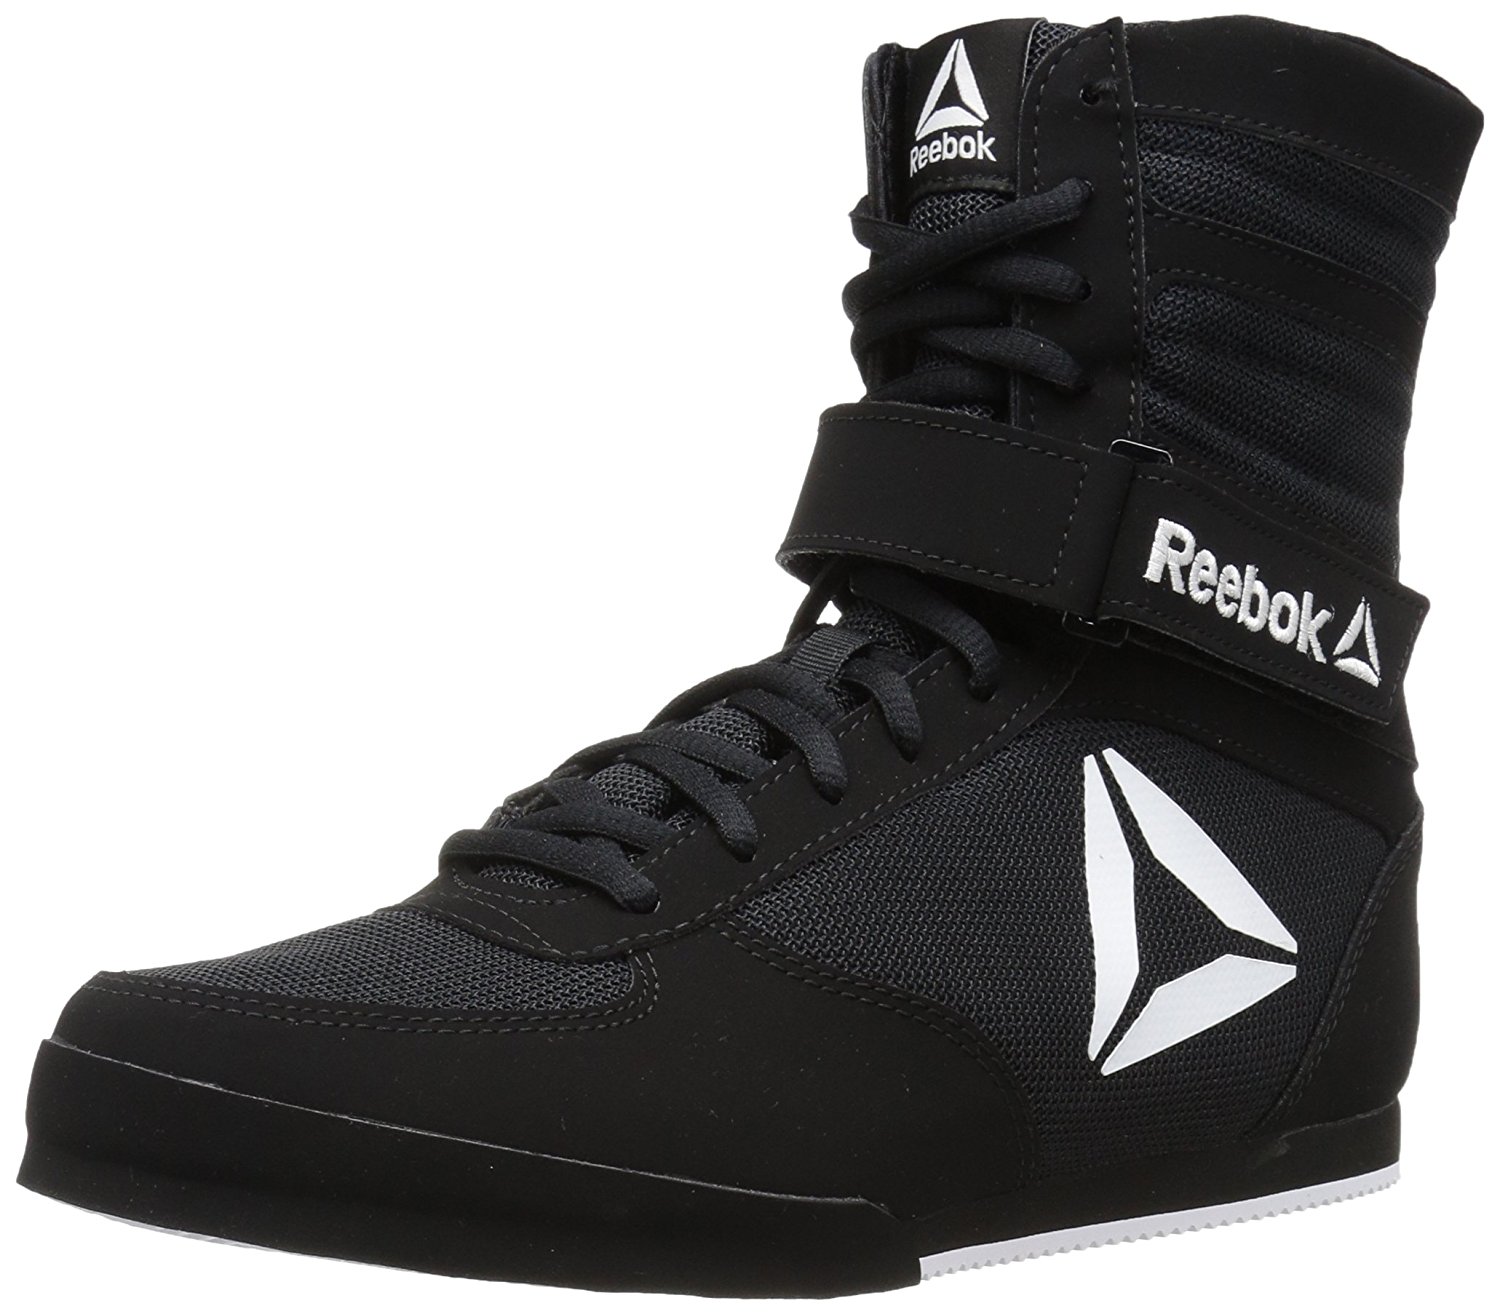 reebok boxing boots red